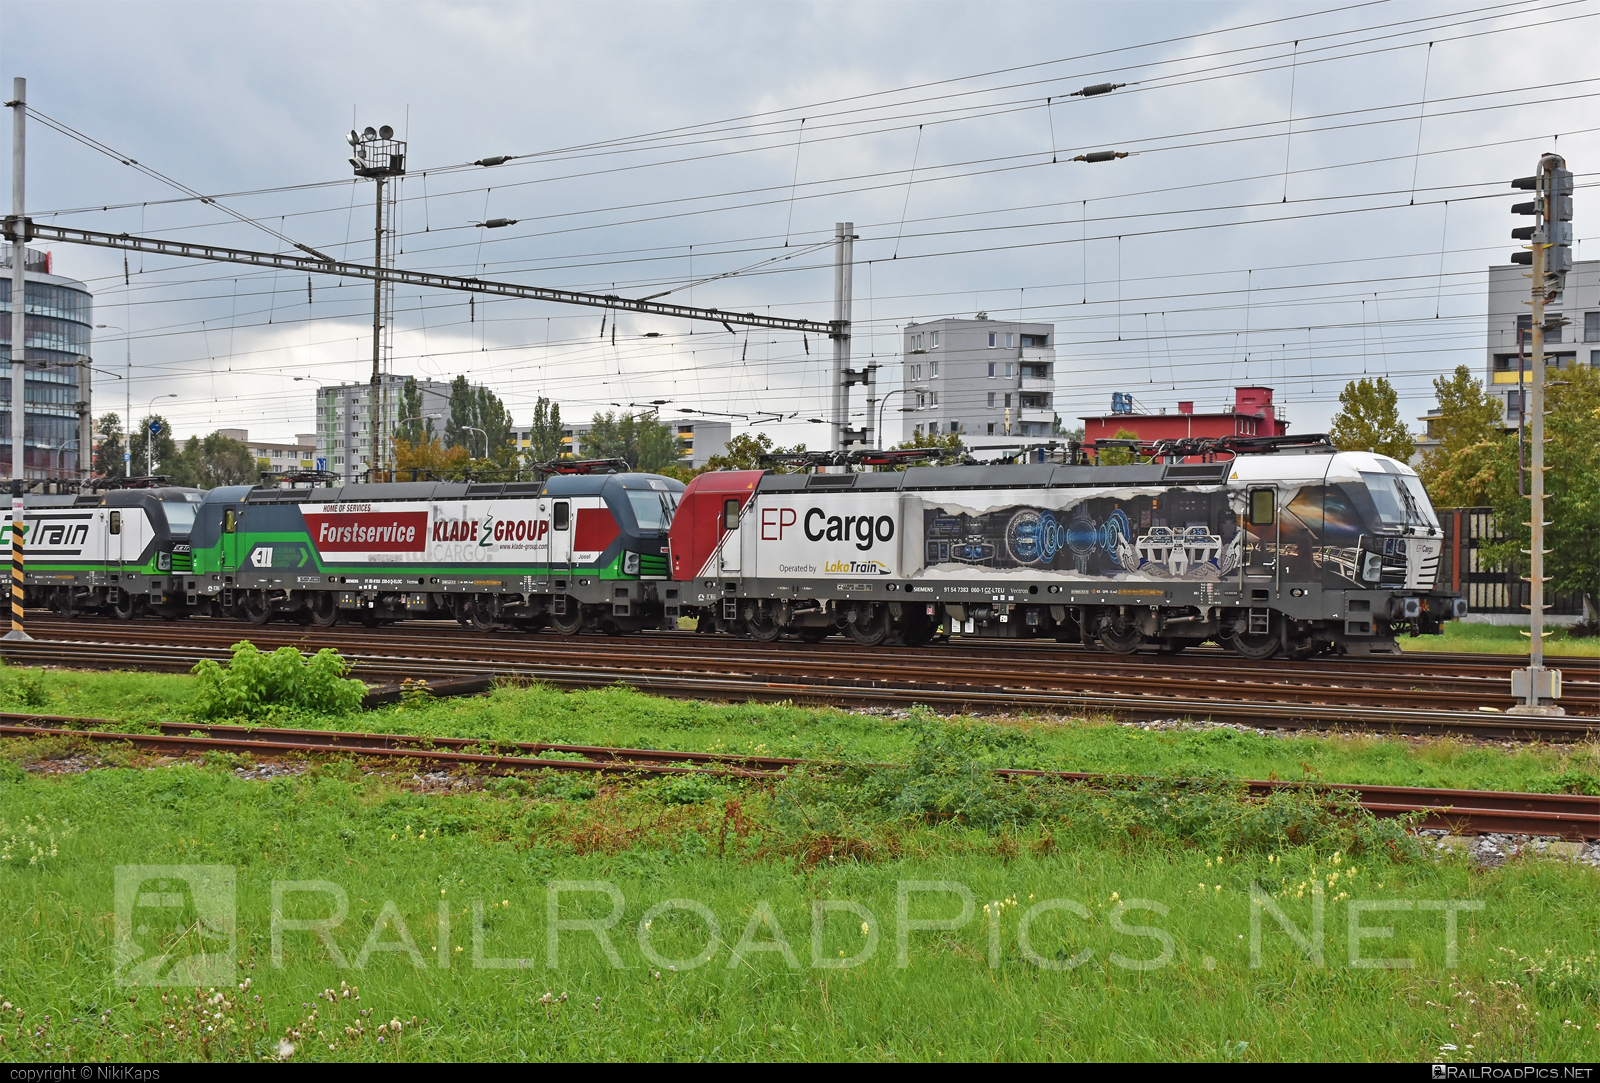 Siemens Vectron MS - 383 060-1 operated by EP Cargo a.s. #epcargo #epci #lokotrain #lokotrainsro #siemens #siemensVectron #siemensVectronMS #vectron #vectronMS